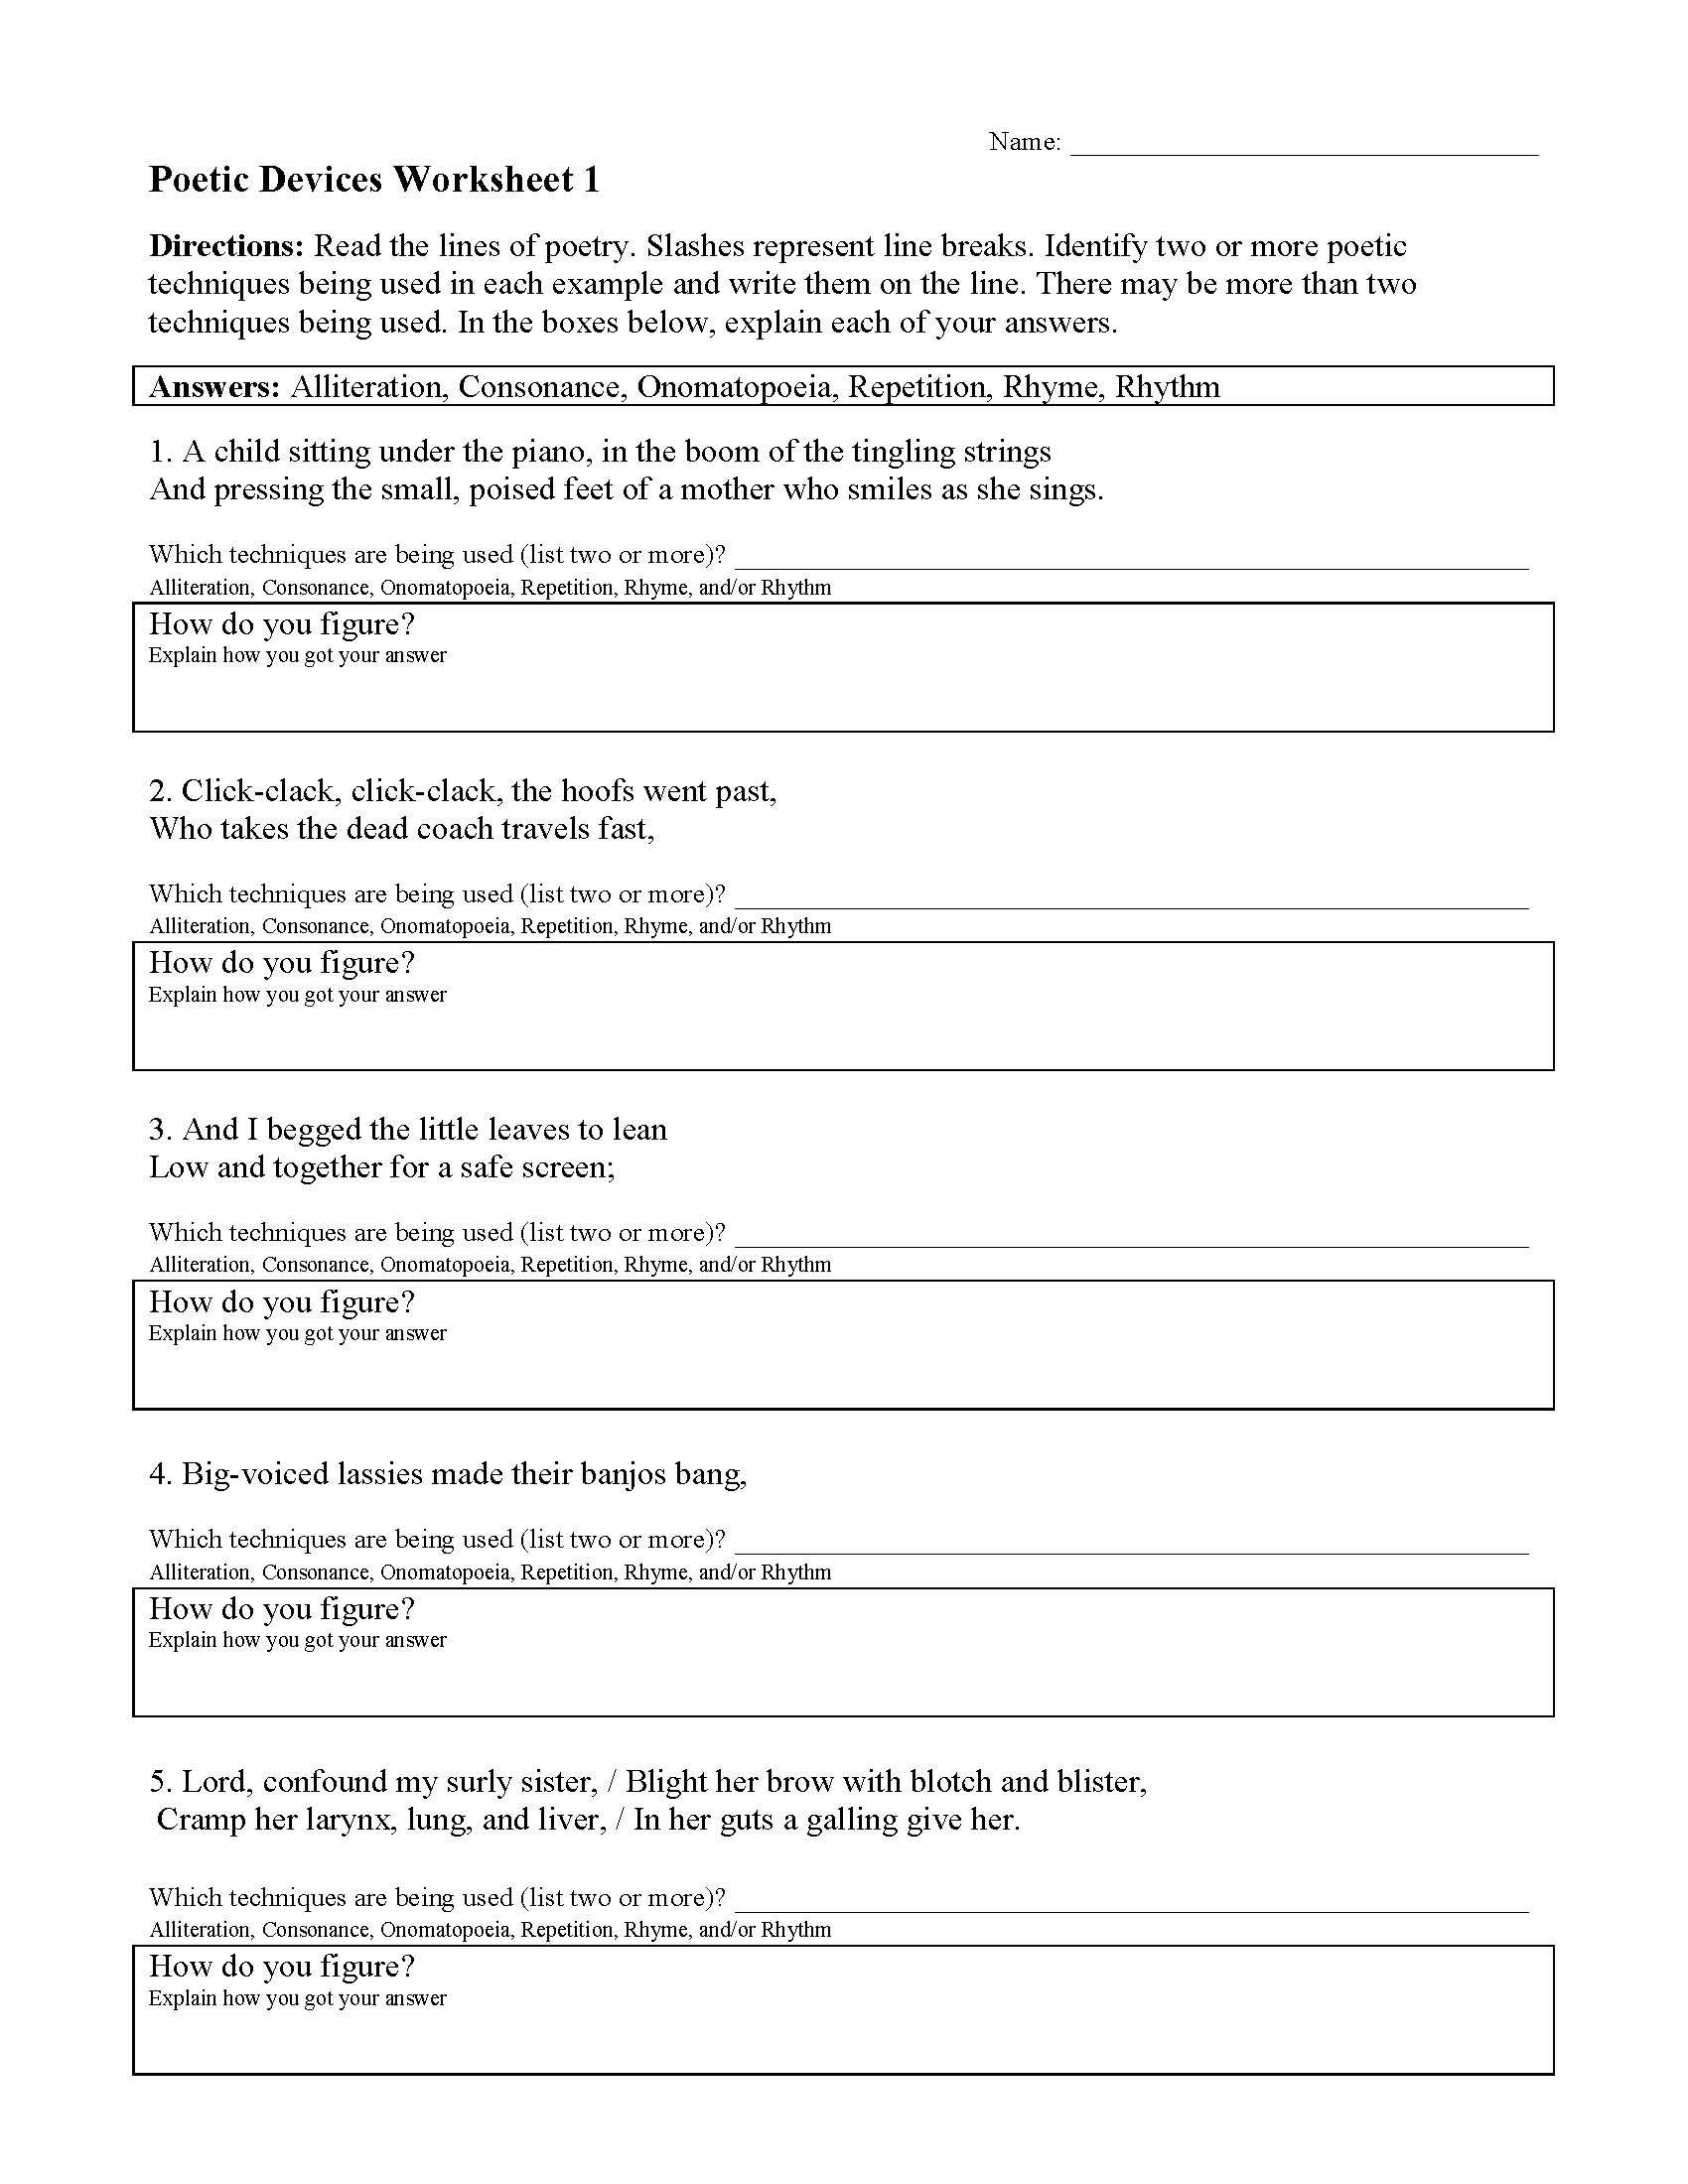 Sound Devices In Poetry Worksheet Poetic Devices Worksheet 1 Preview